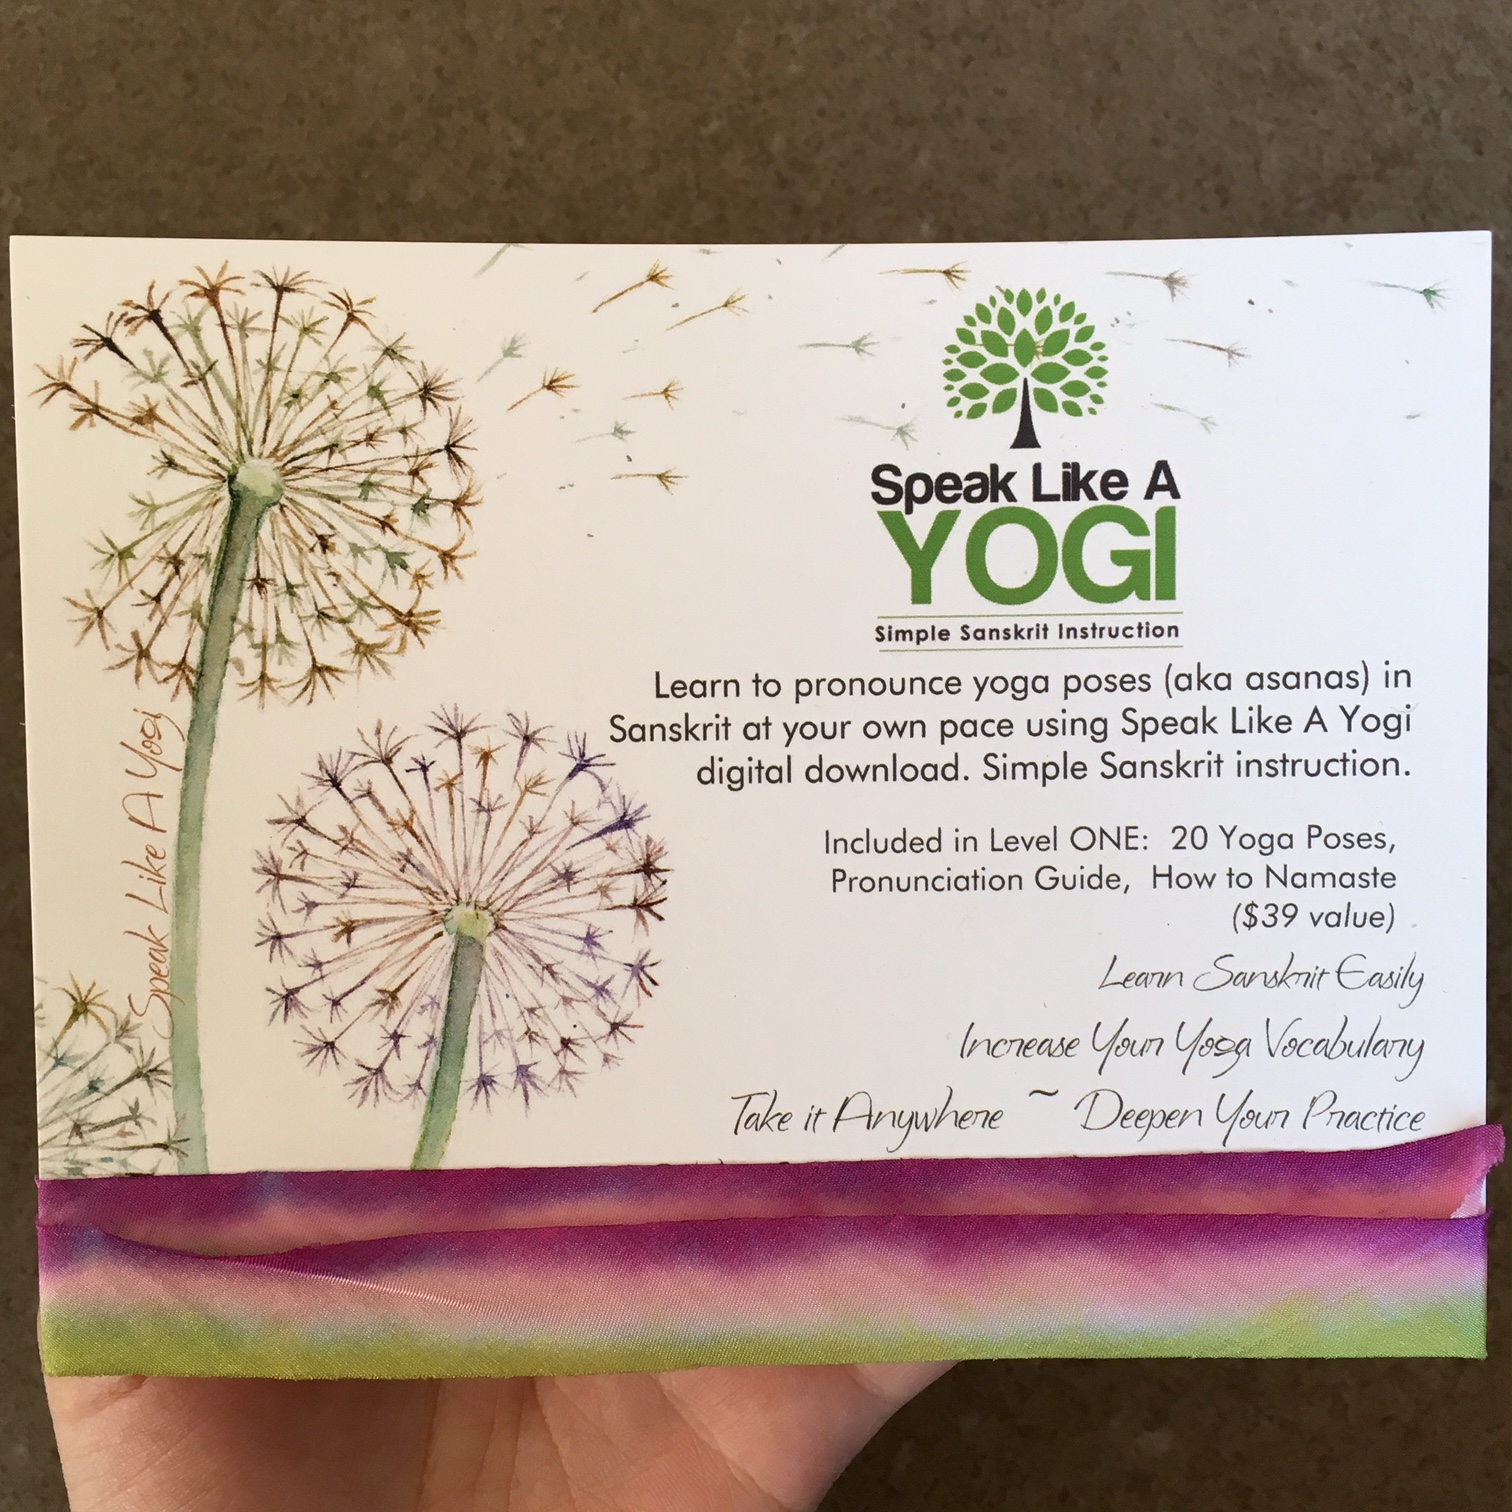 Mantra Download Card and Wish Bracelet from Speak Like a Yogi